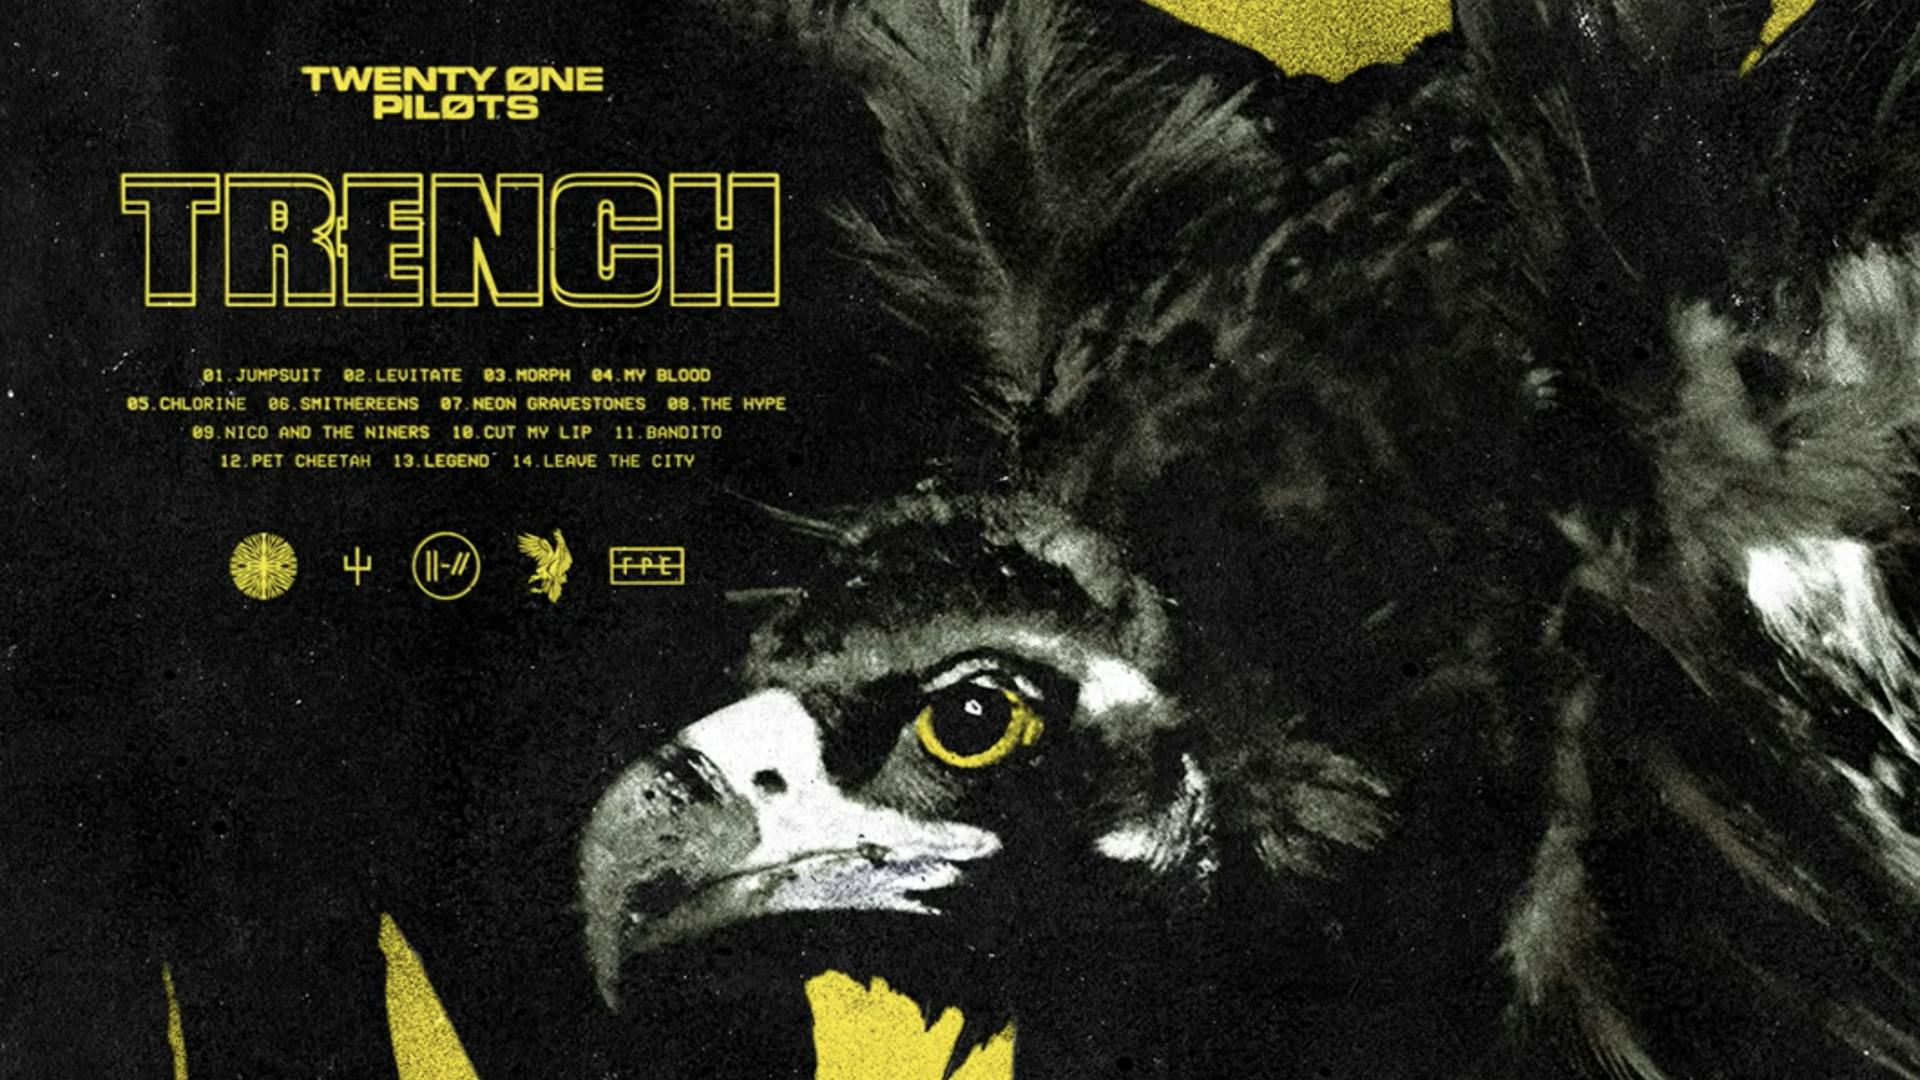 Trench The story of twenty one pilots’ most ambitious… Kerrang!